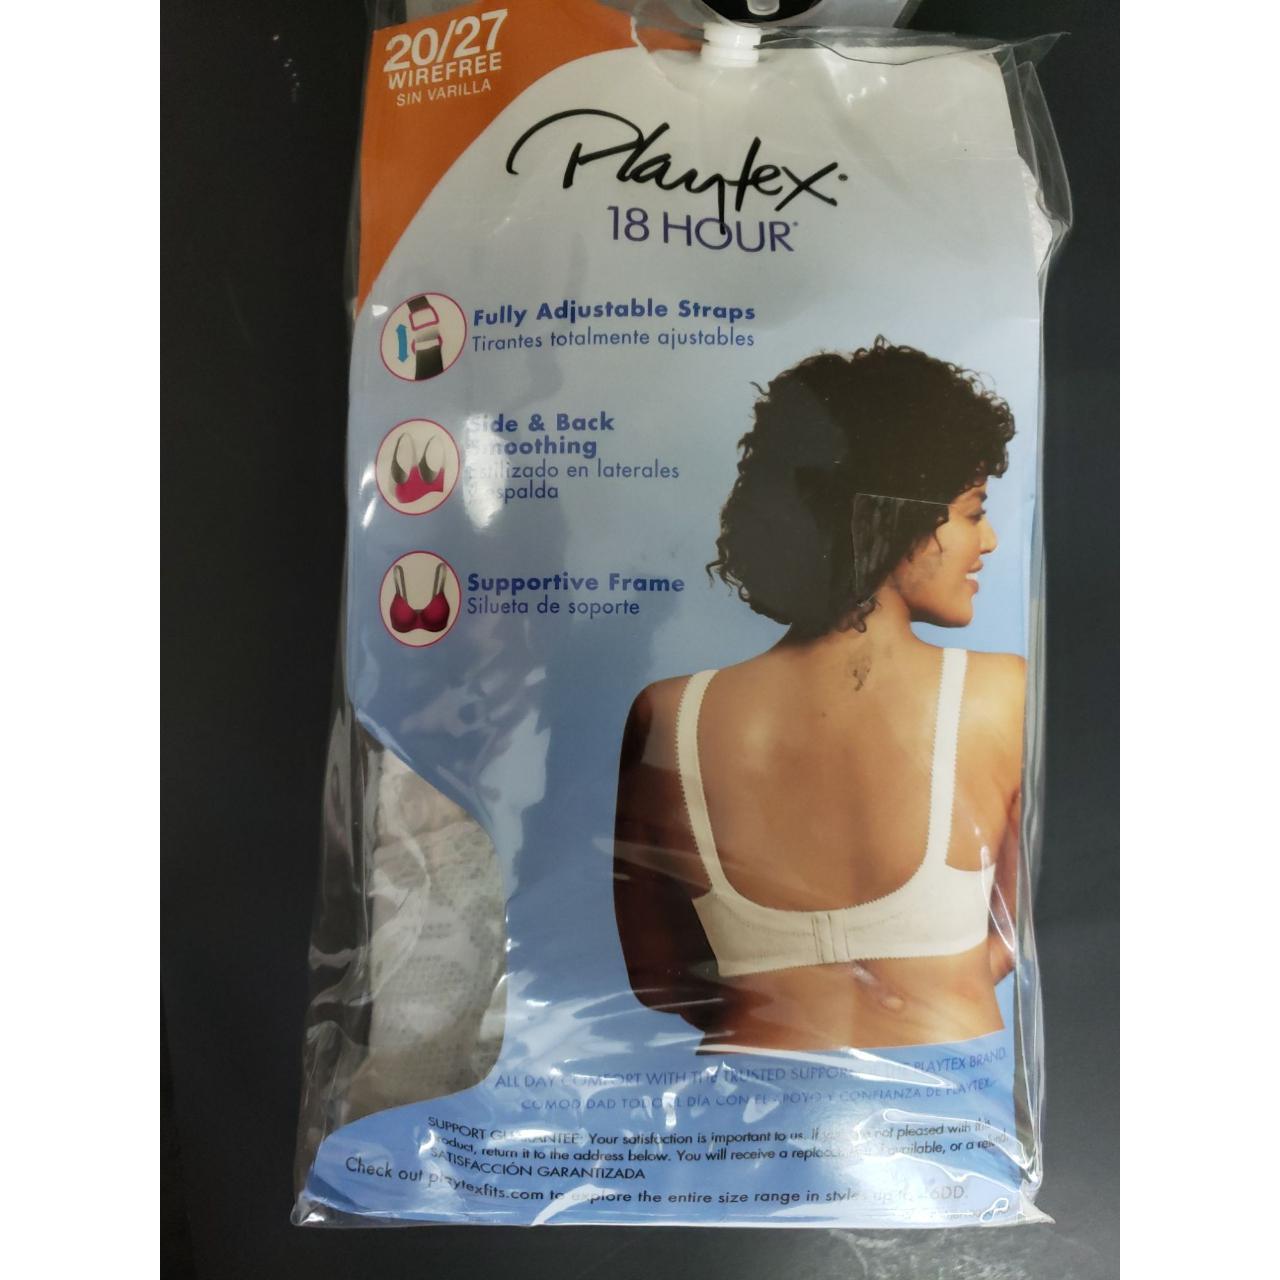 Playtex 18 Hour Sensational Support Wirefree Bra Style 20/27 Size